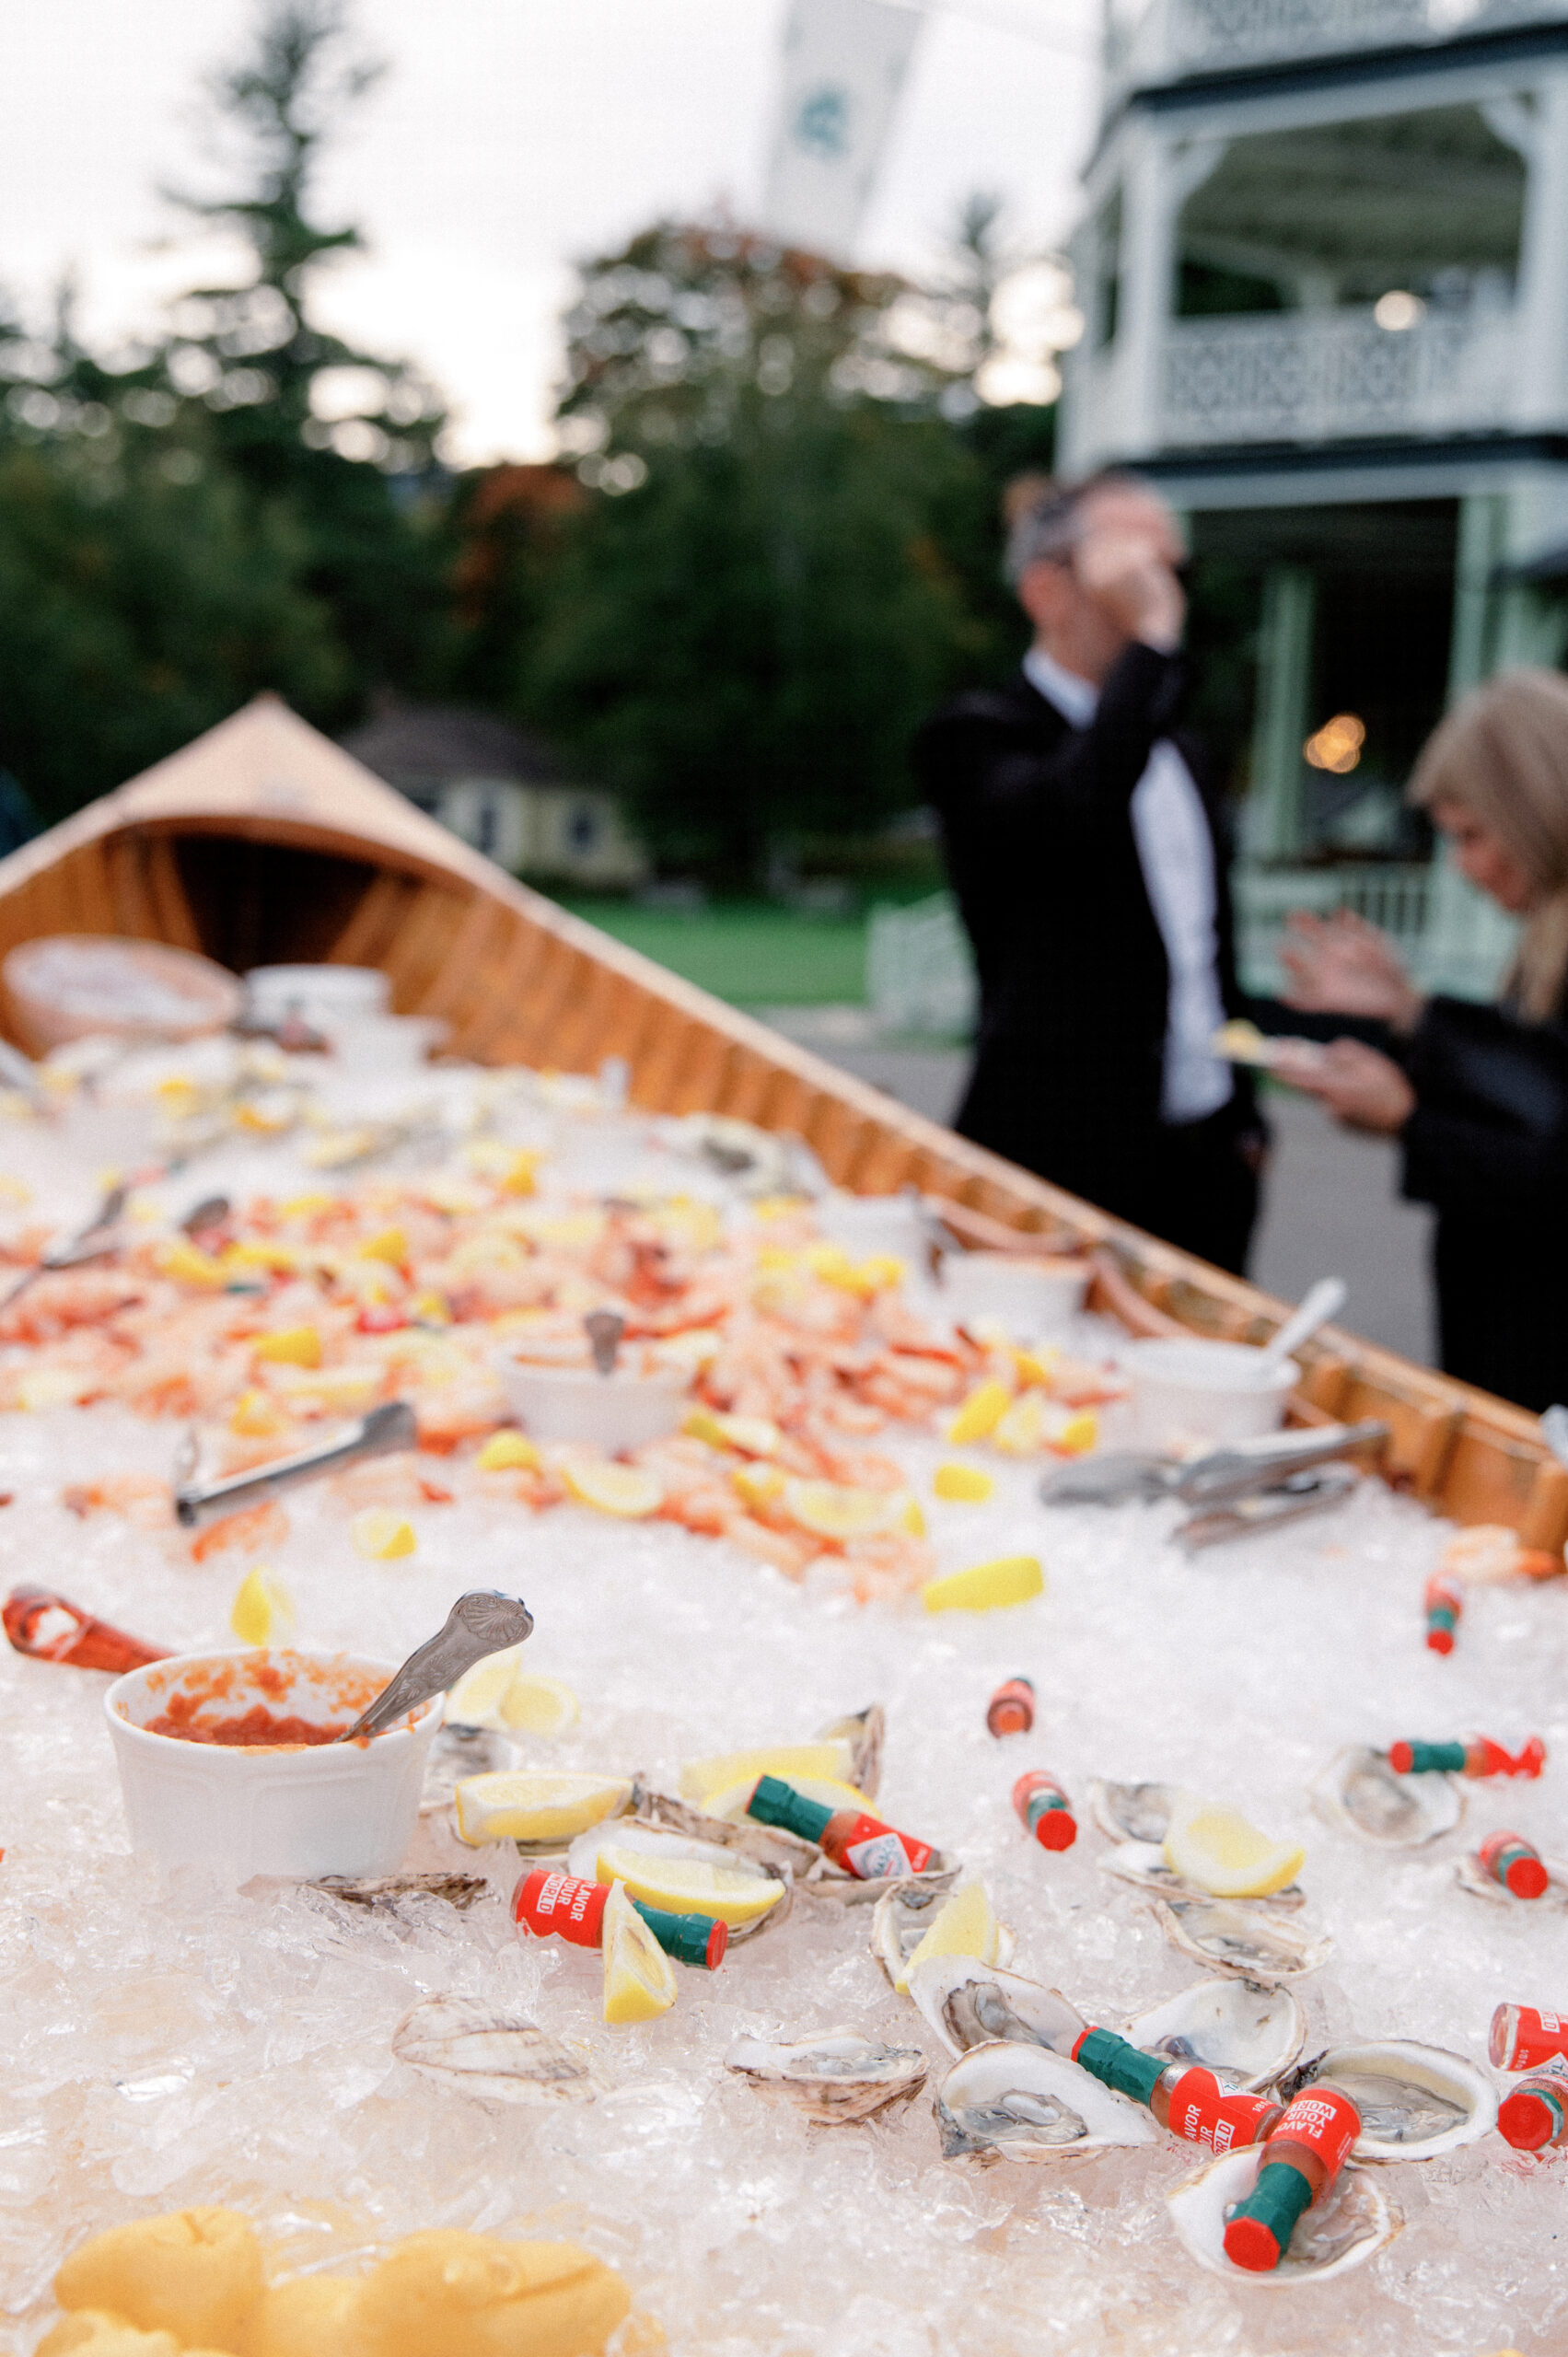 Appetizers in a boat. Upstate New York Wedding image by Jenny Fu Studio